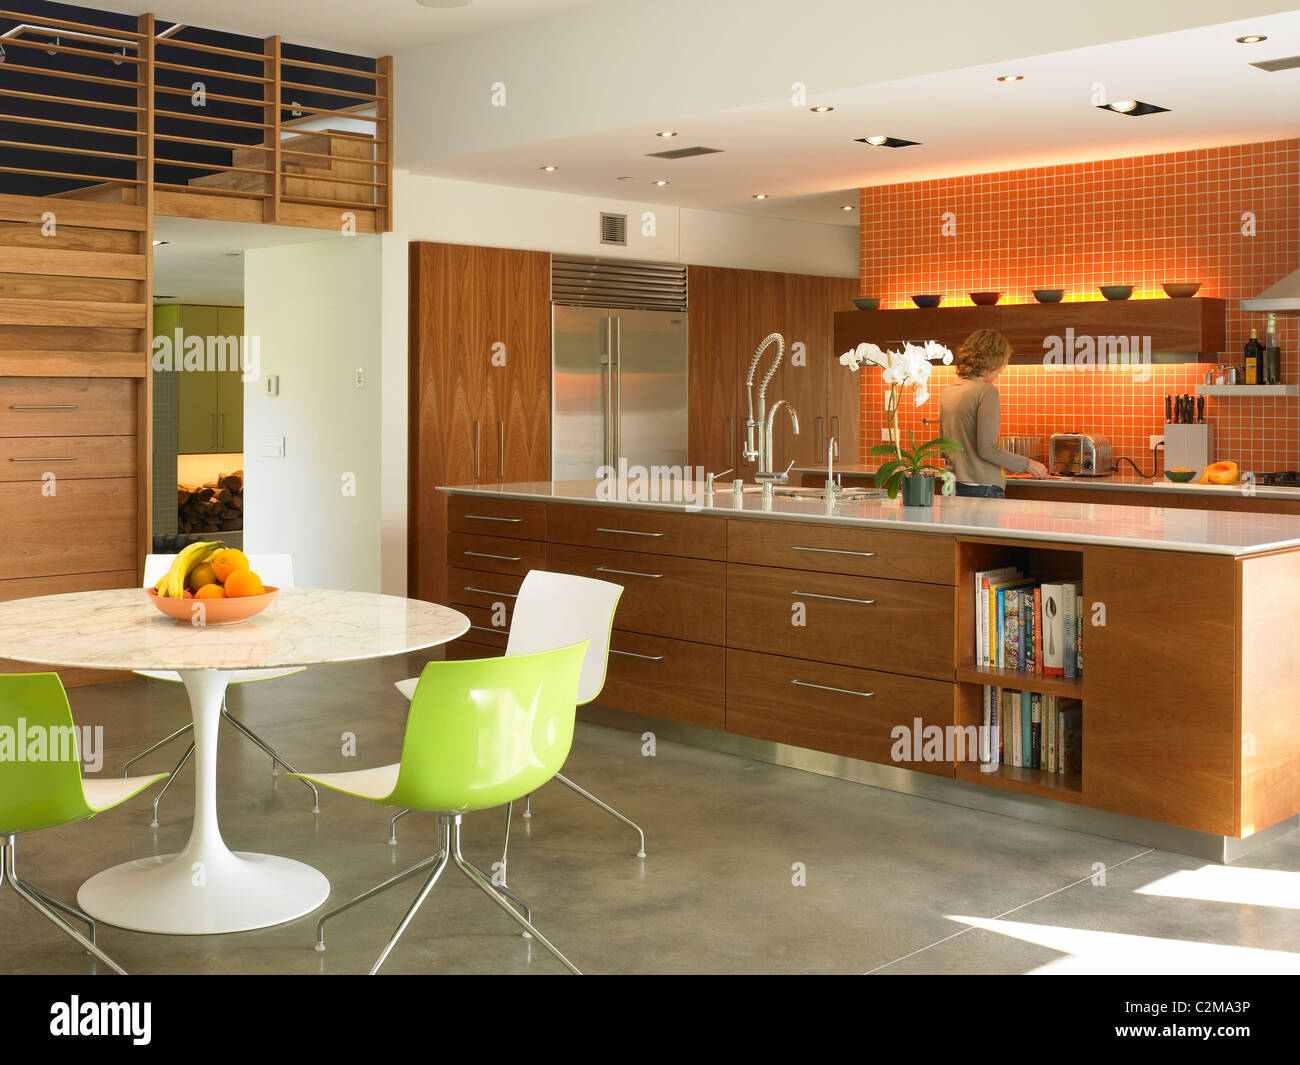 Kaplan Wright House, Los Angeles kitchen with Saarinen table and sustainable cherry wood cabinets Stock Photo